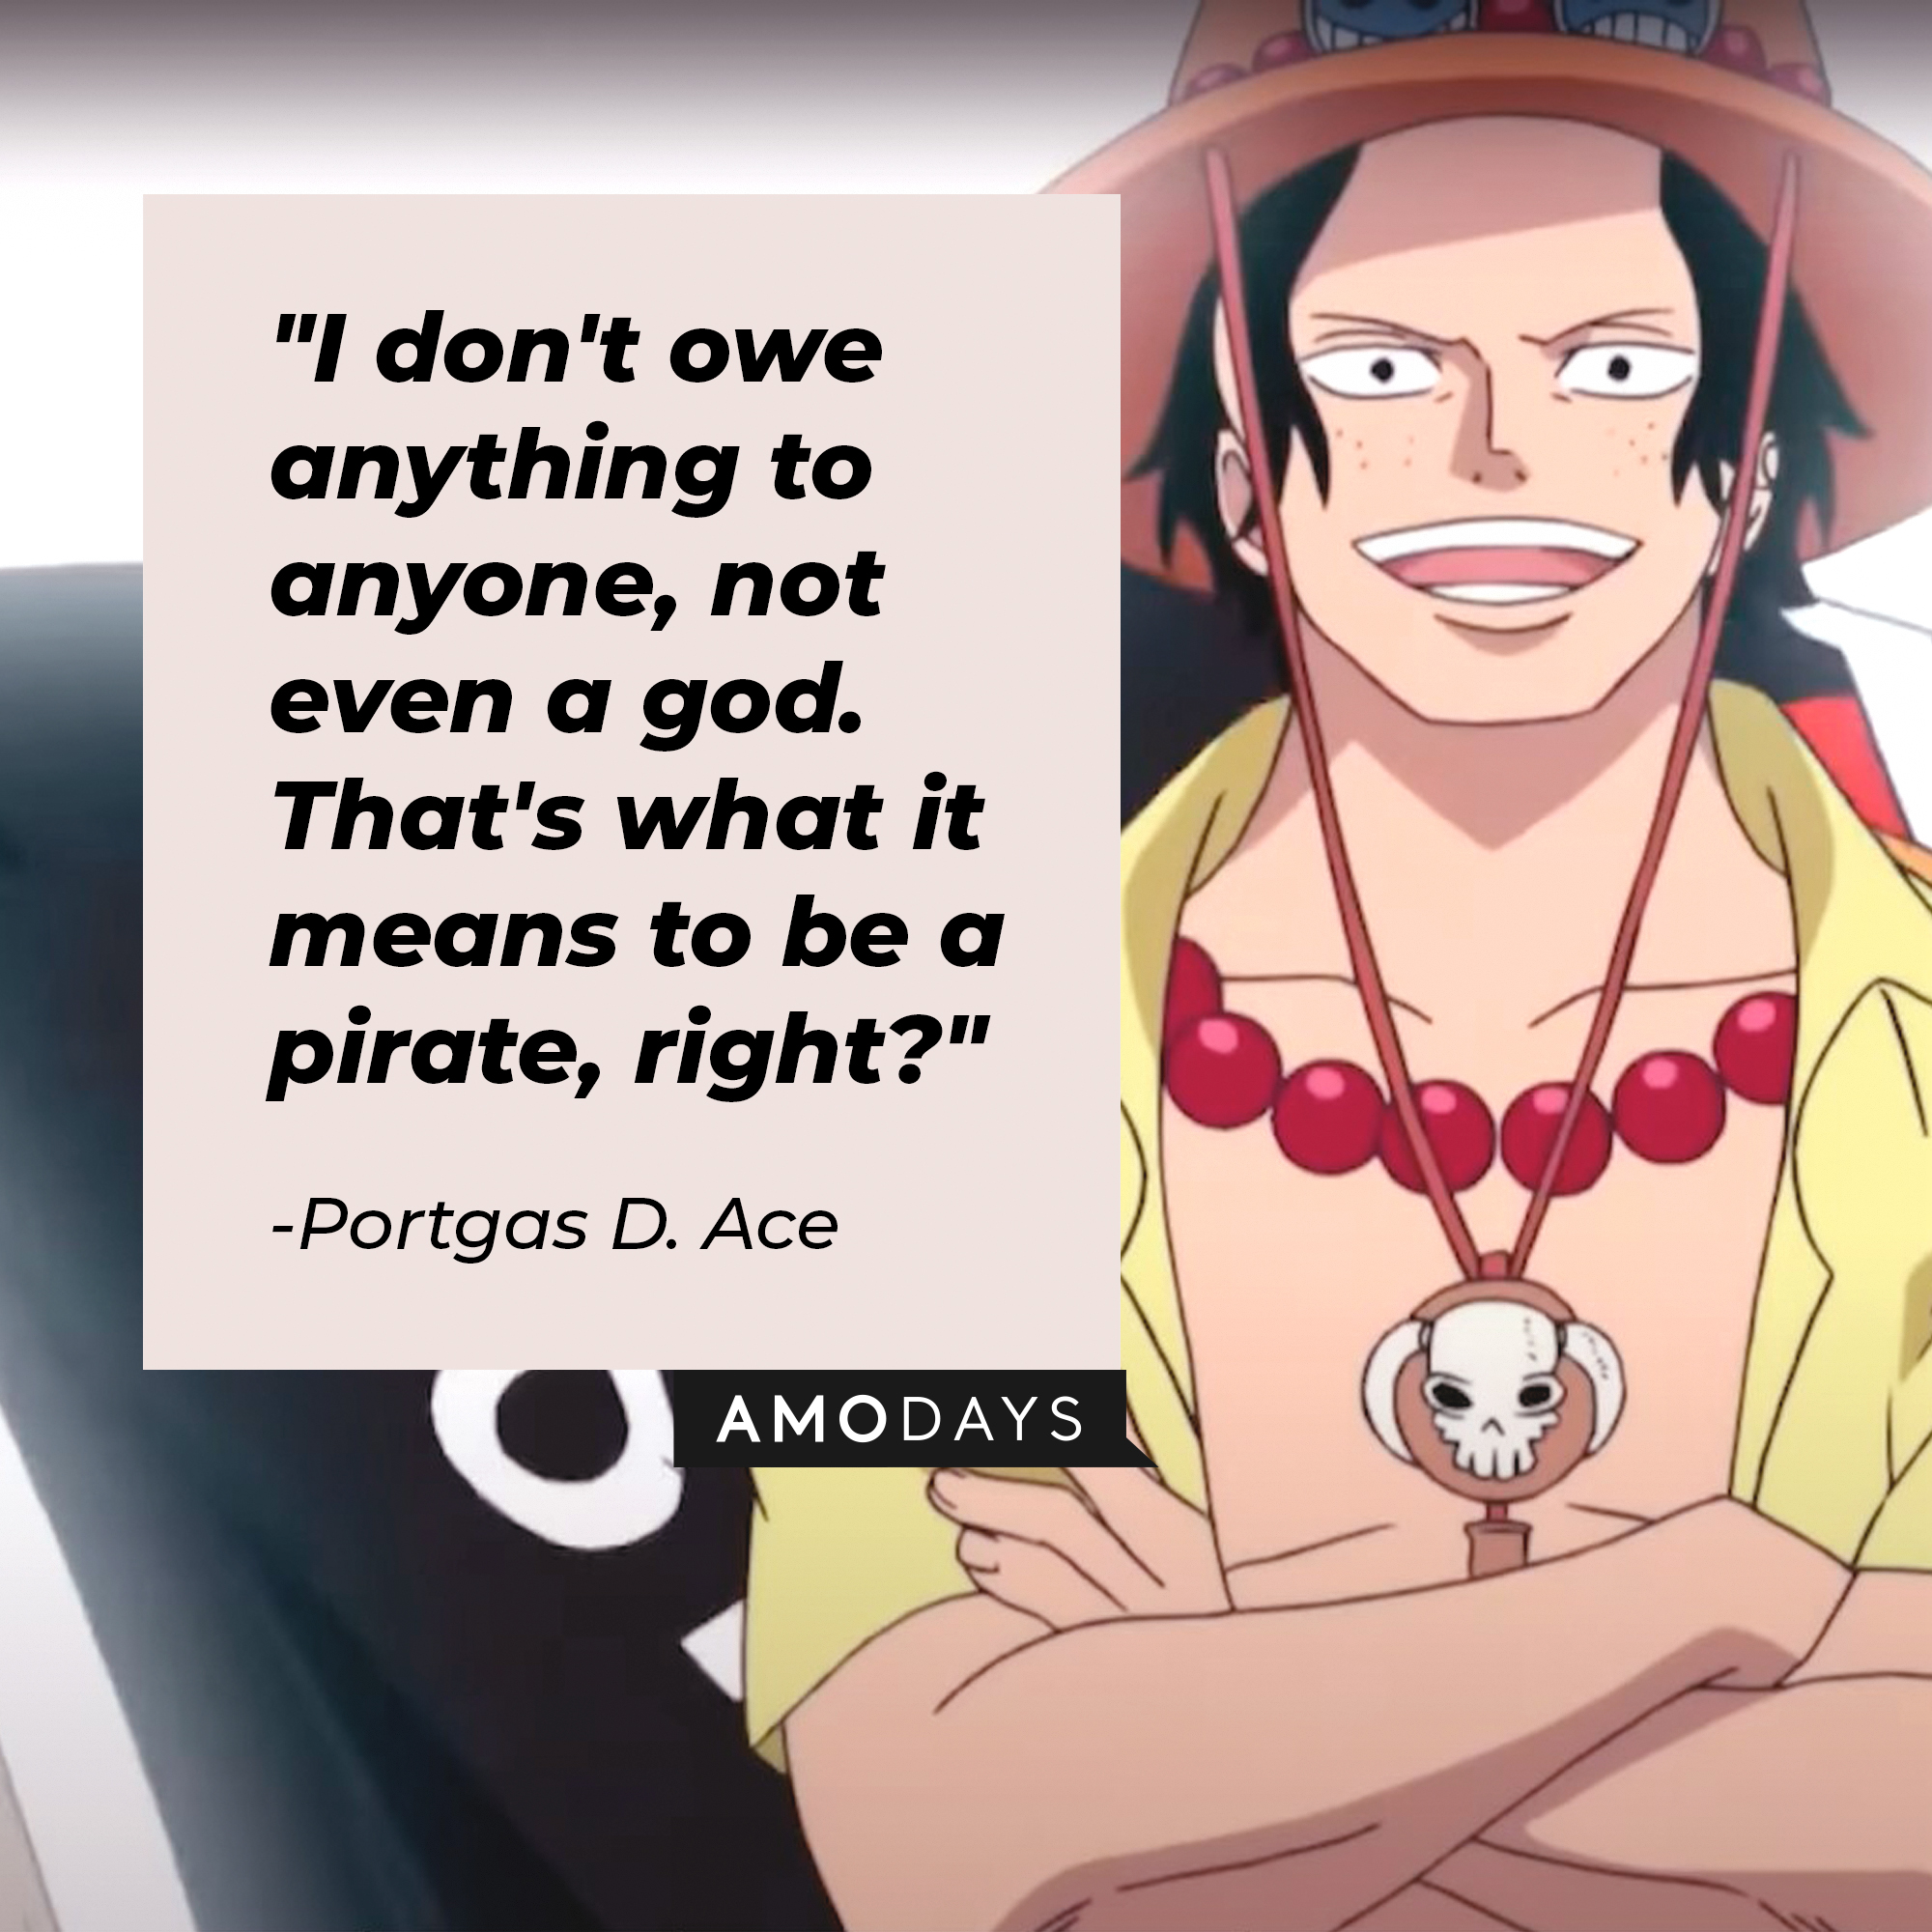 Portgas D. Ac with a text overlay reading, "I don't owe anything to anyone, not even a god. That's what it means to be a pirate, right?" | Source: facebook.com/onepieceofficial